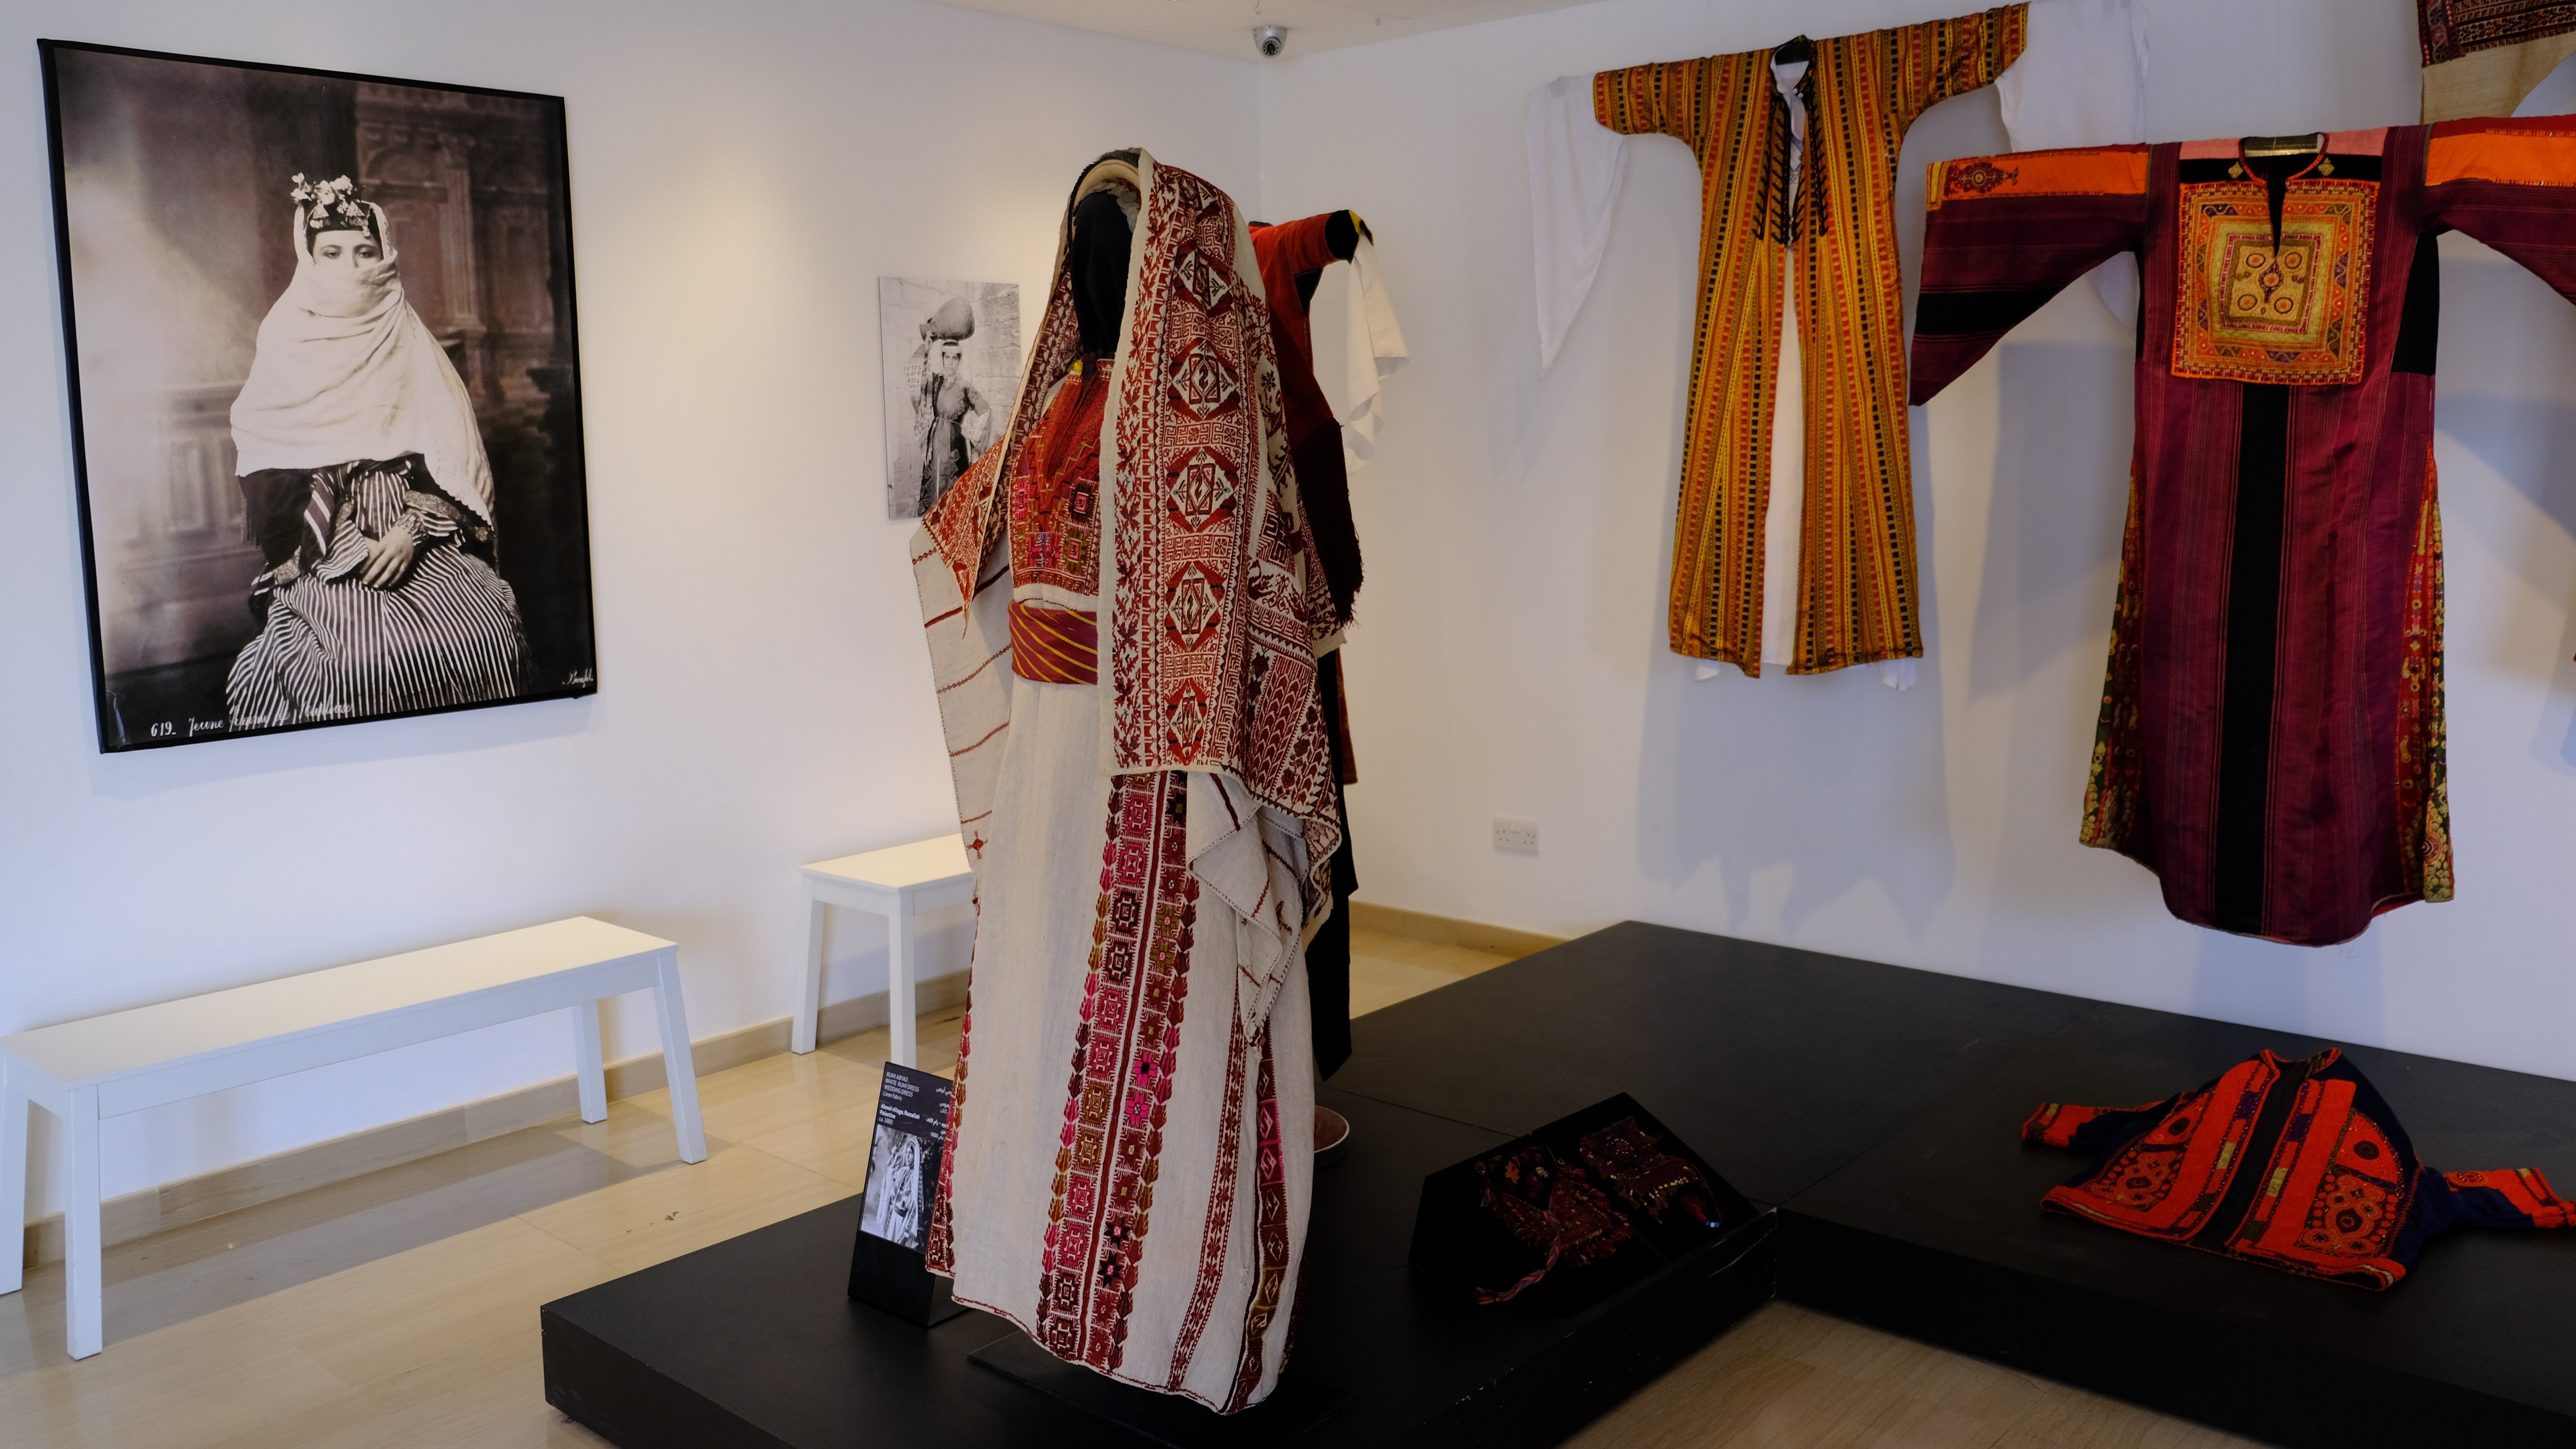 Exhibition space displaying Levantine costumes and an ancient photo of a women in traditional dress in Widad Kawar's Tiraz Museum (photo: Marta Vidal)